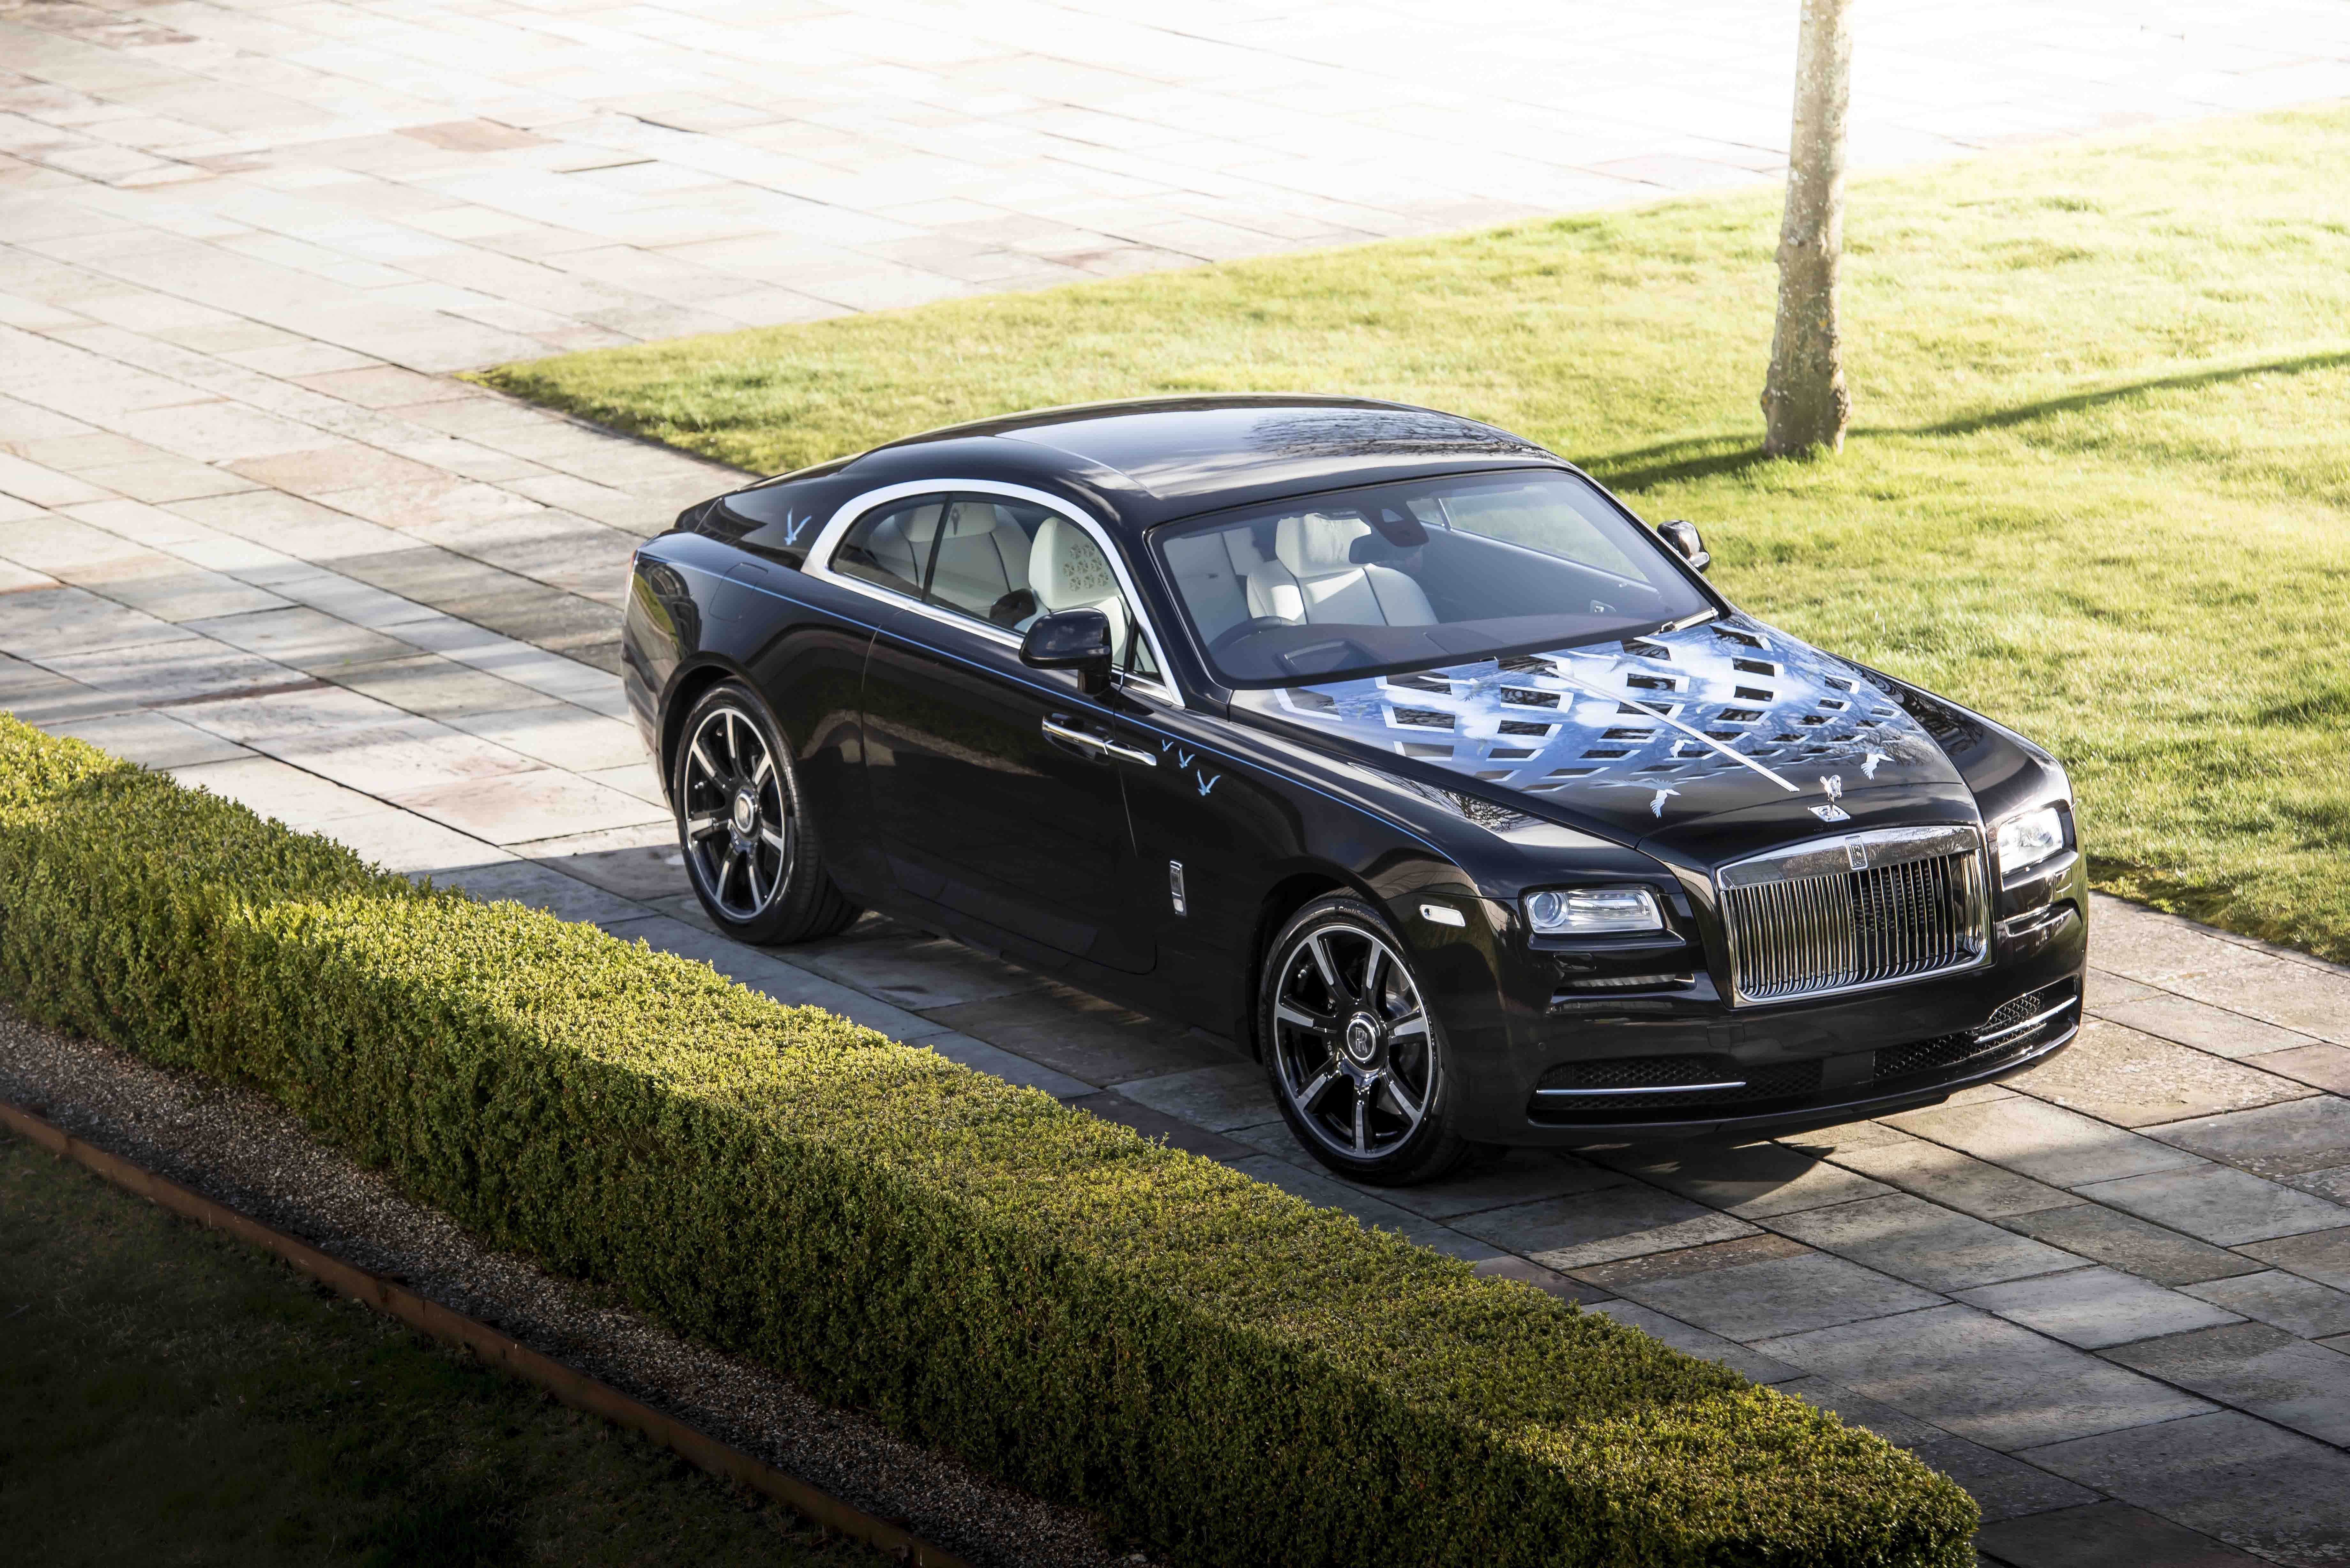 Rolls-Royce inspired by British music for series of bespoke Wraith models